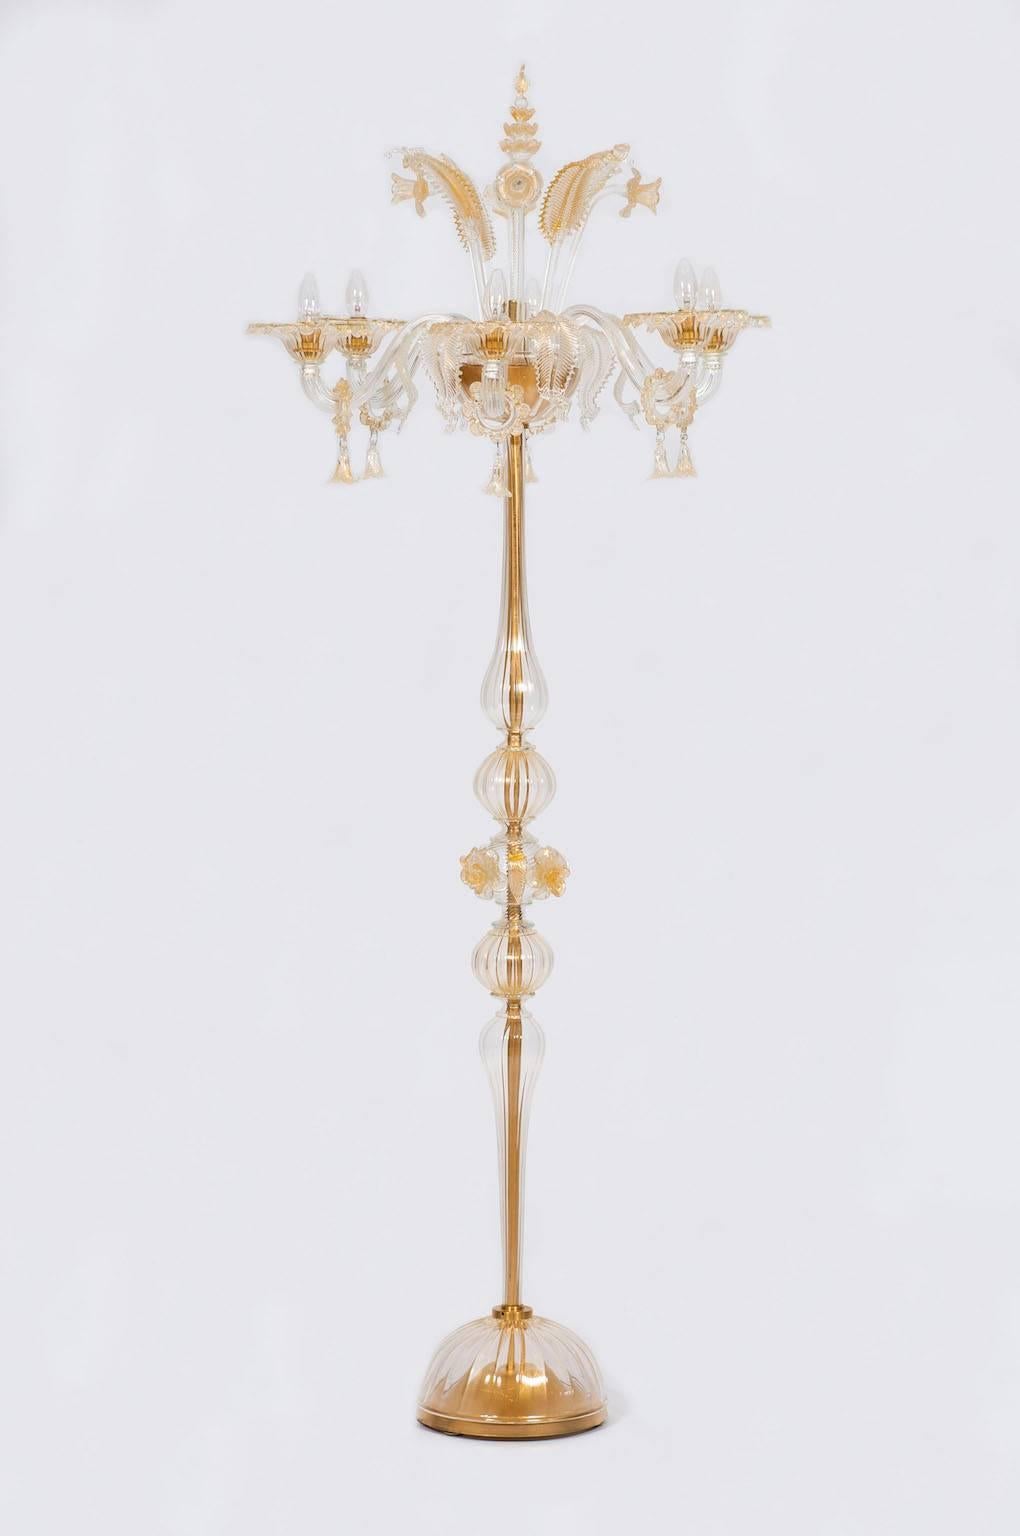 Gold Floor Lamp in blown Murano Glass flowers and leaves 1990s Italy.
Elegant Italian Venetian floor lamp in Murano glass amber color, composed by a stem with in the middle a sphere with three flowers and by a garden; in the upper part composed by